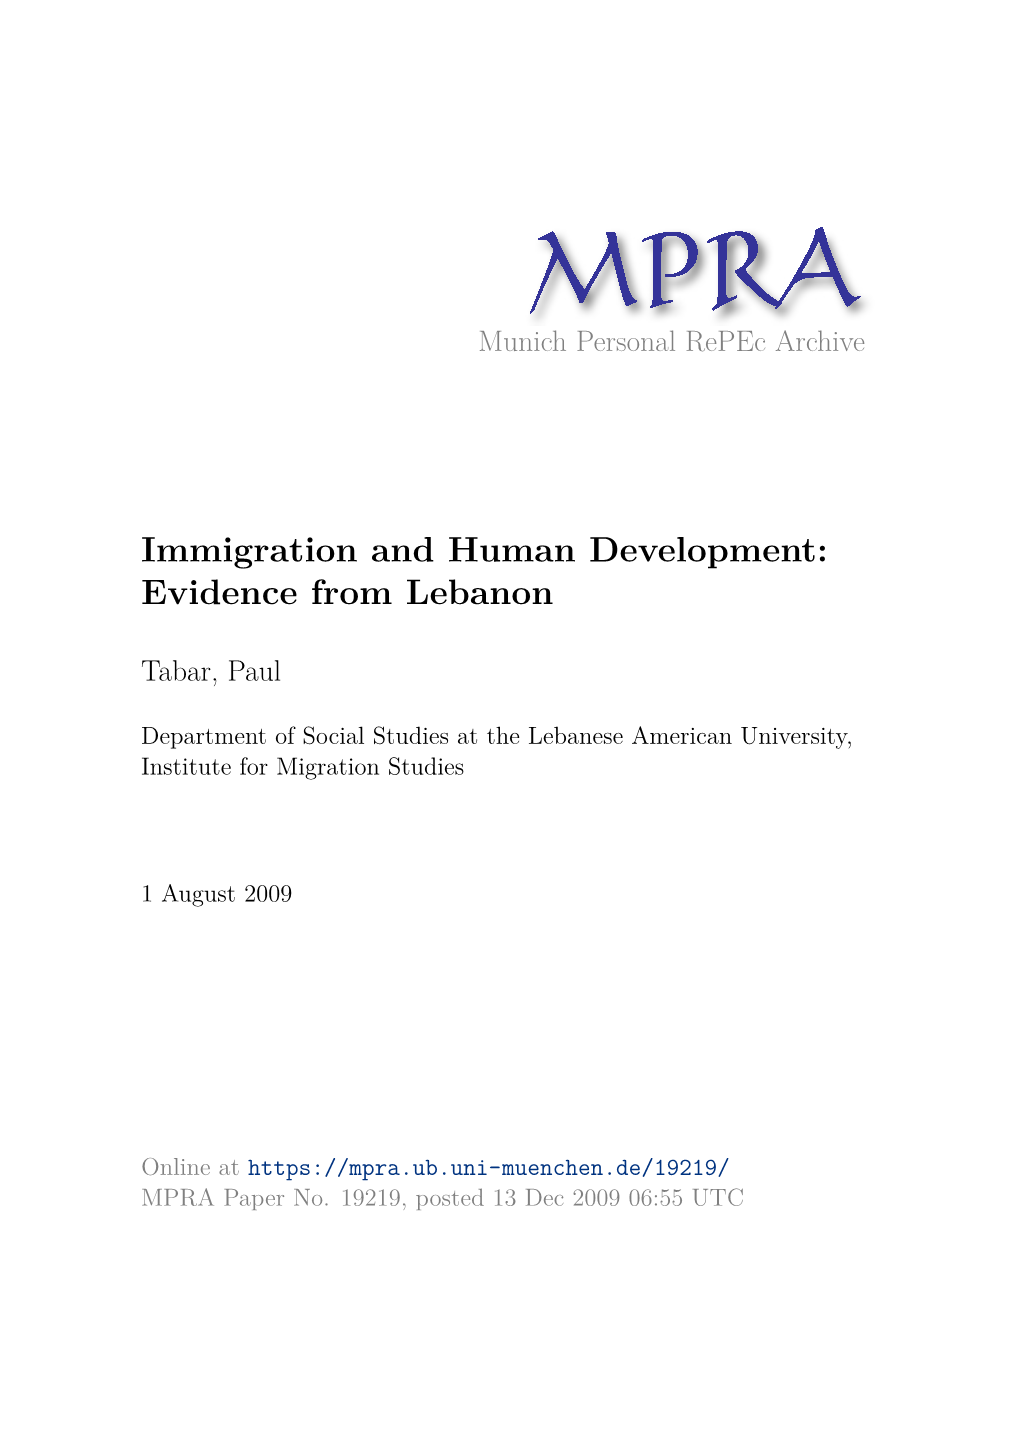 Immigration and Human Development: Evidence from Lebanon